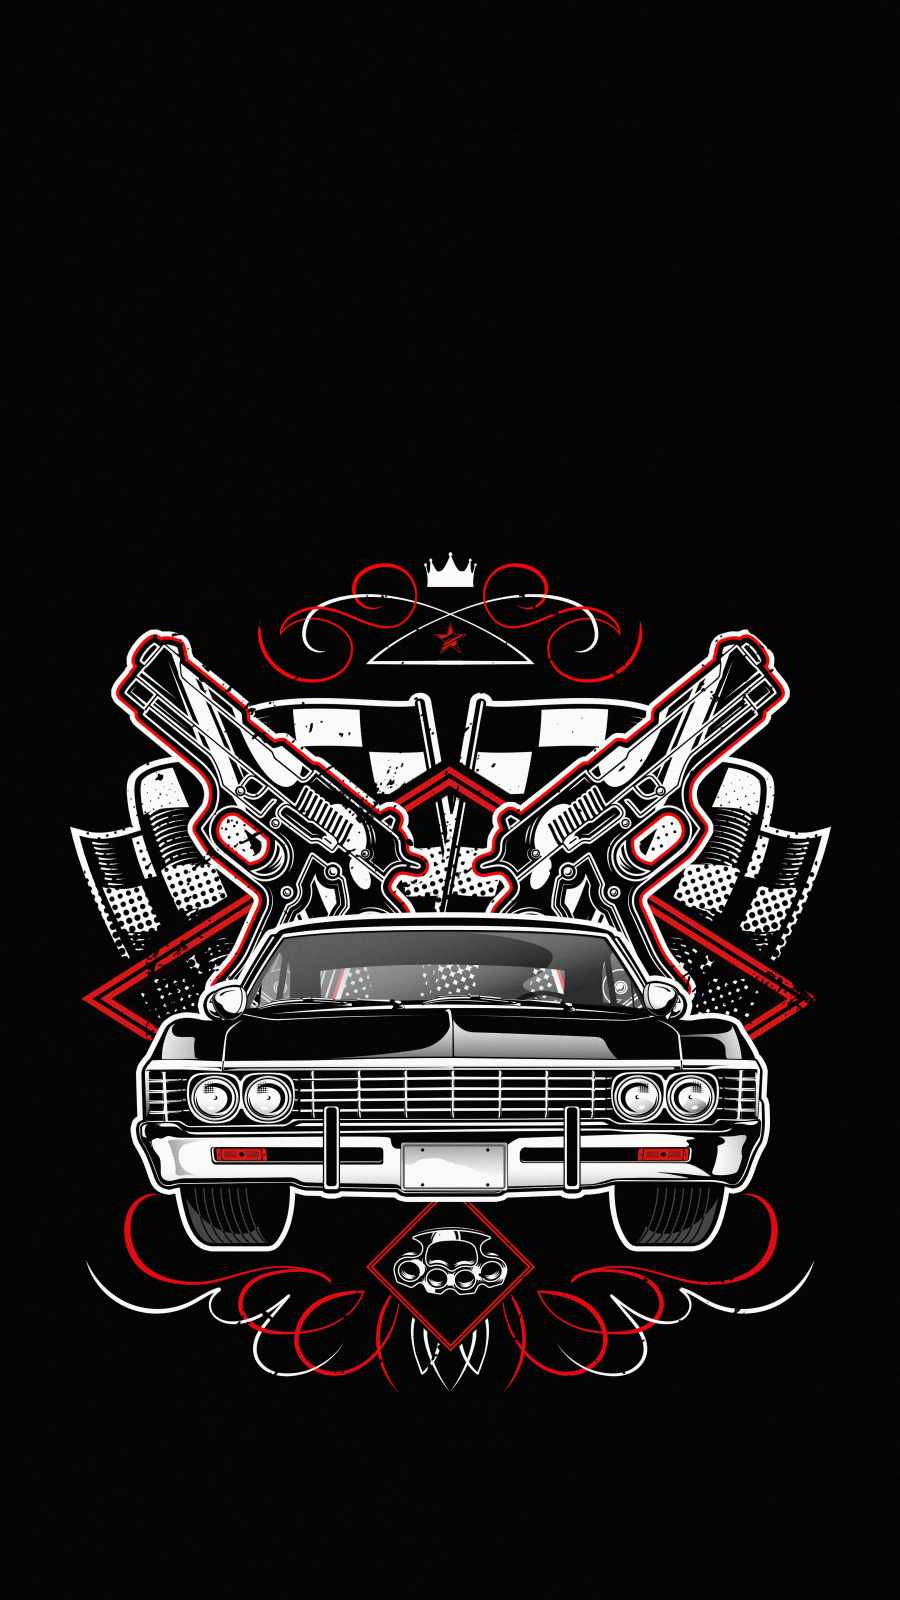 Lowrider Gangster IPhone Wallpaper - IPhone Wallpapers : iPhone Wallpapers